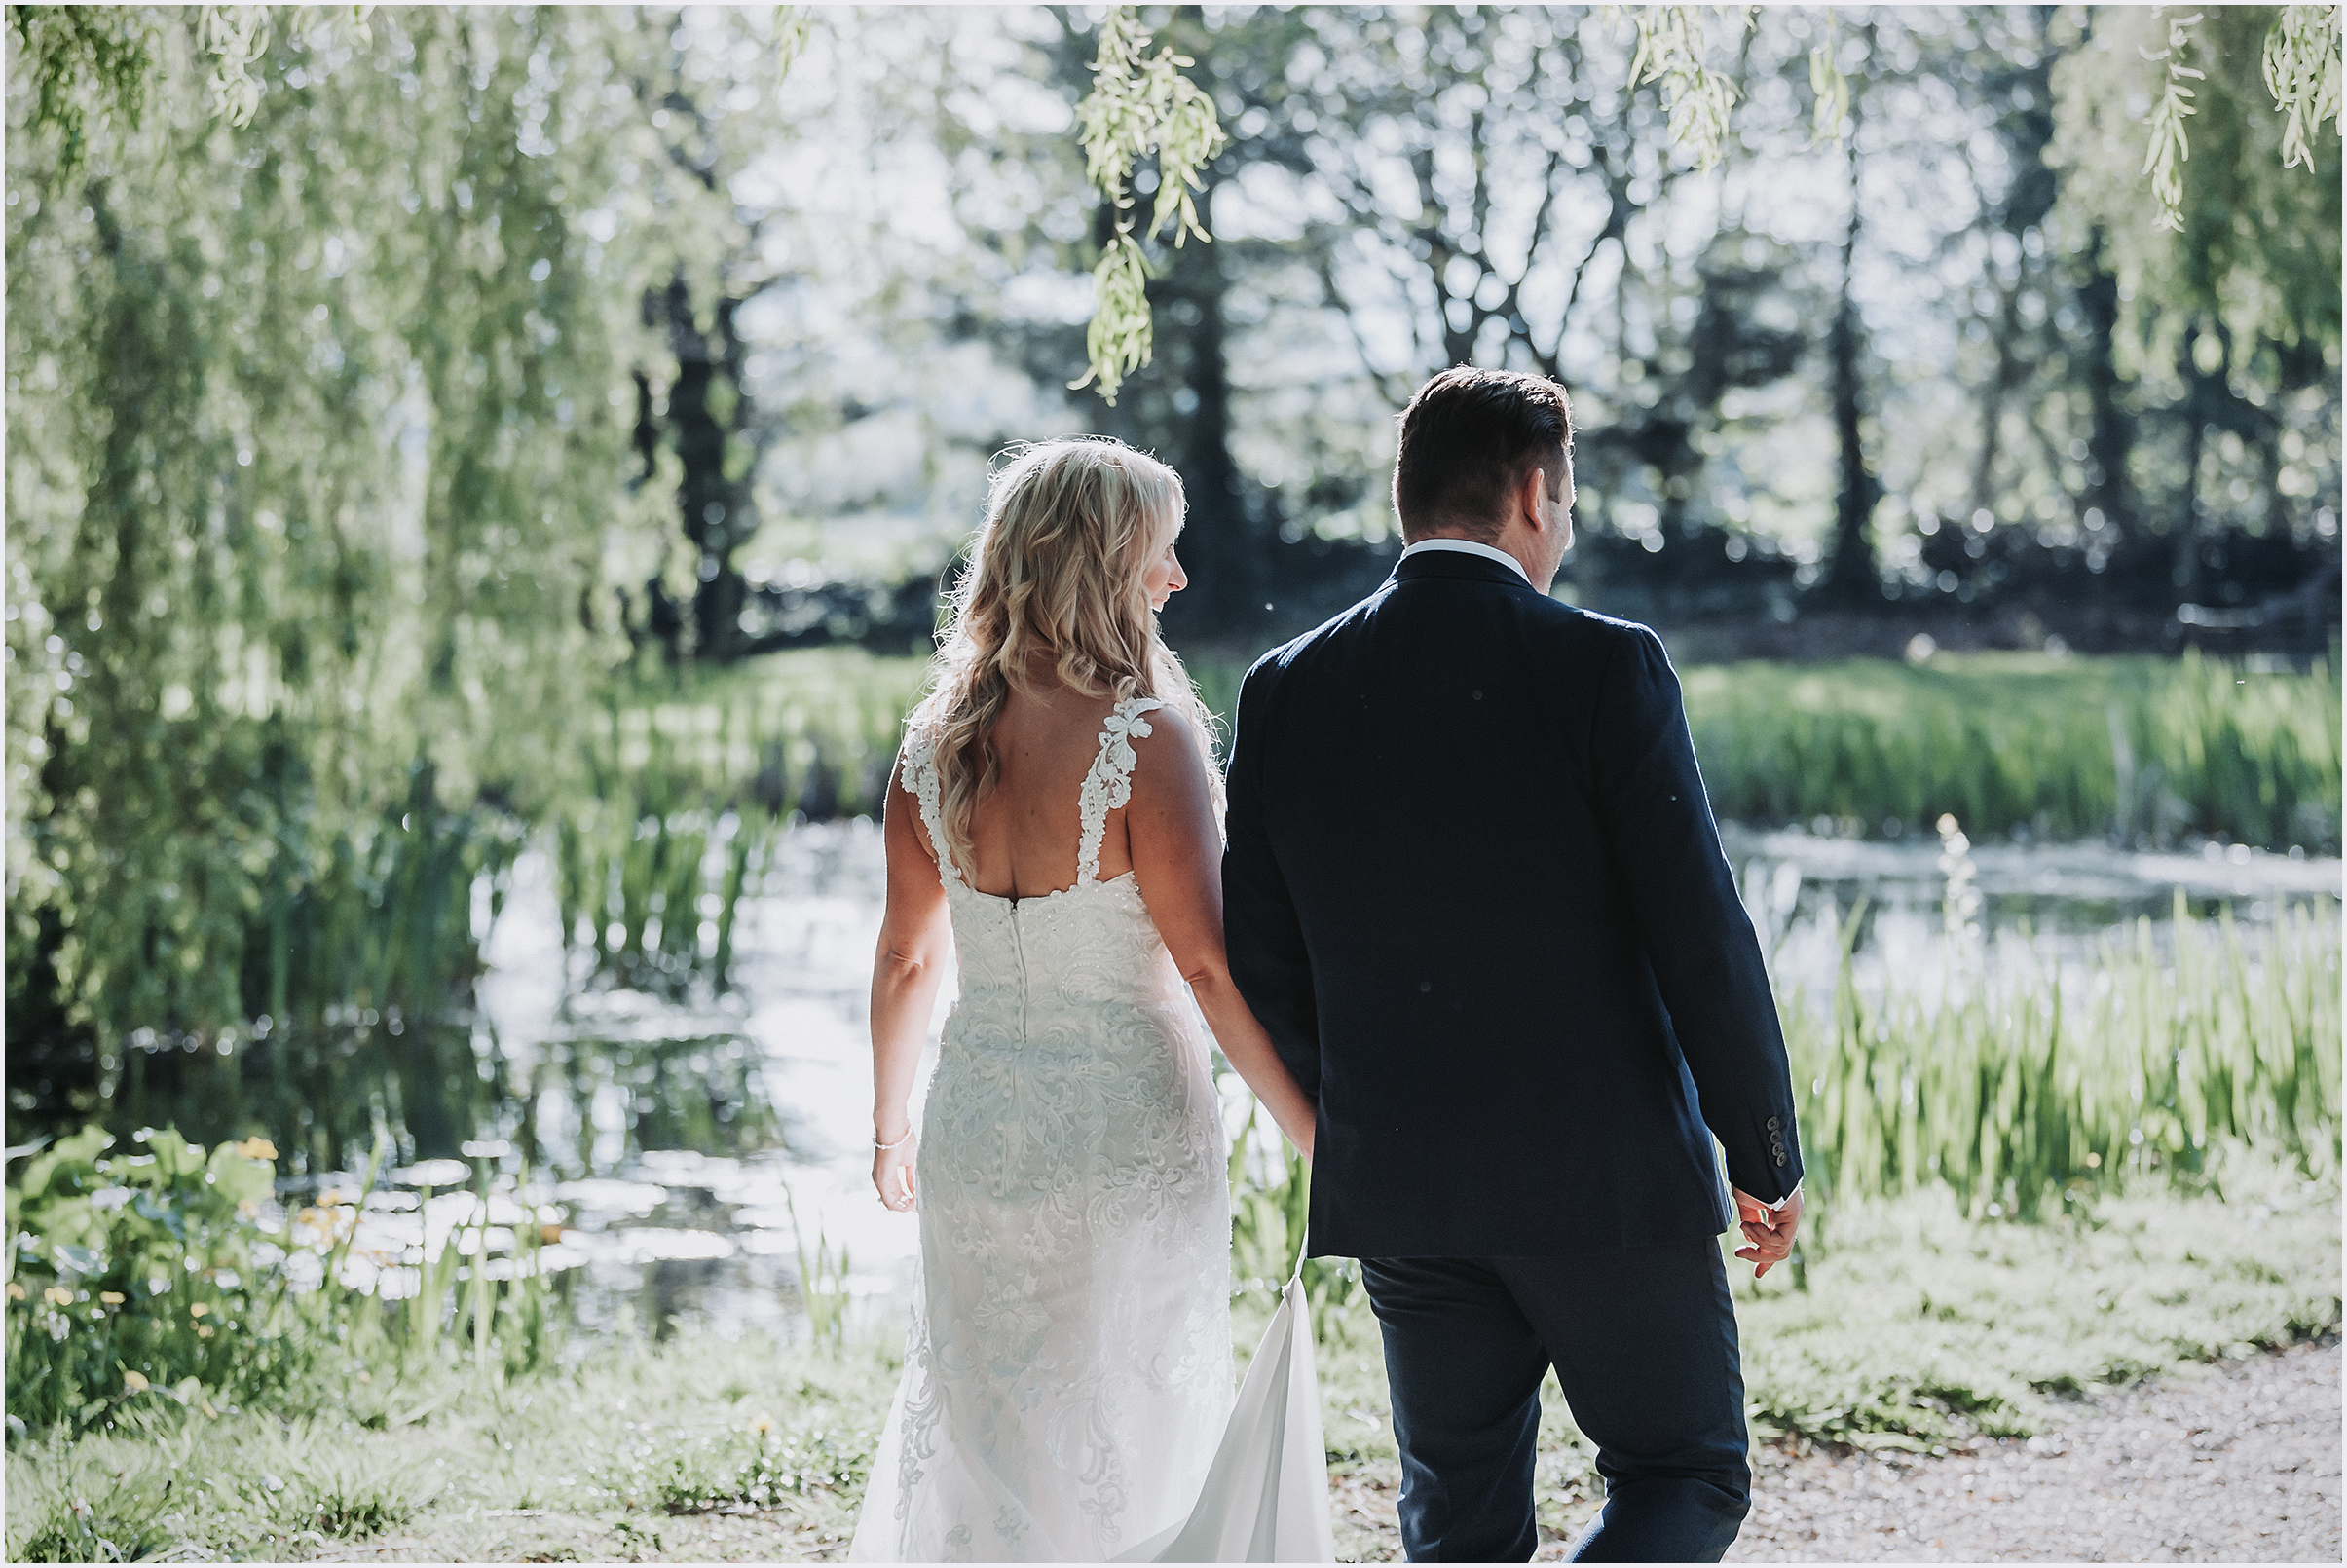 A bride and groom walking hand in hand by a lake at The Grosvenor Pulford Hotel and Spa